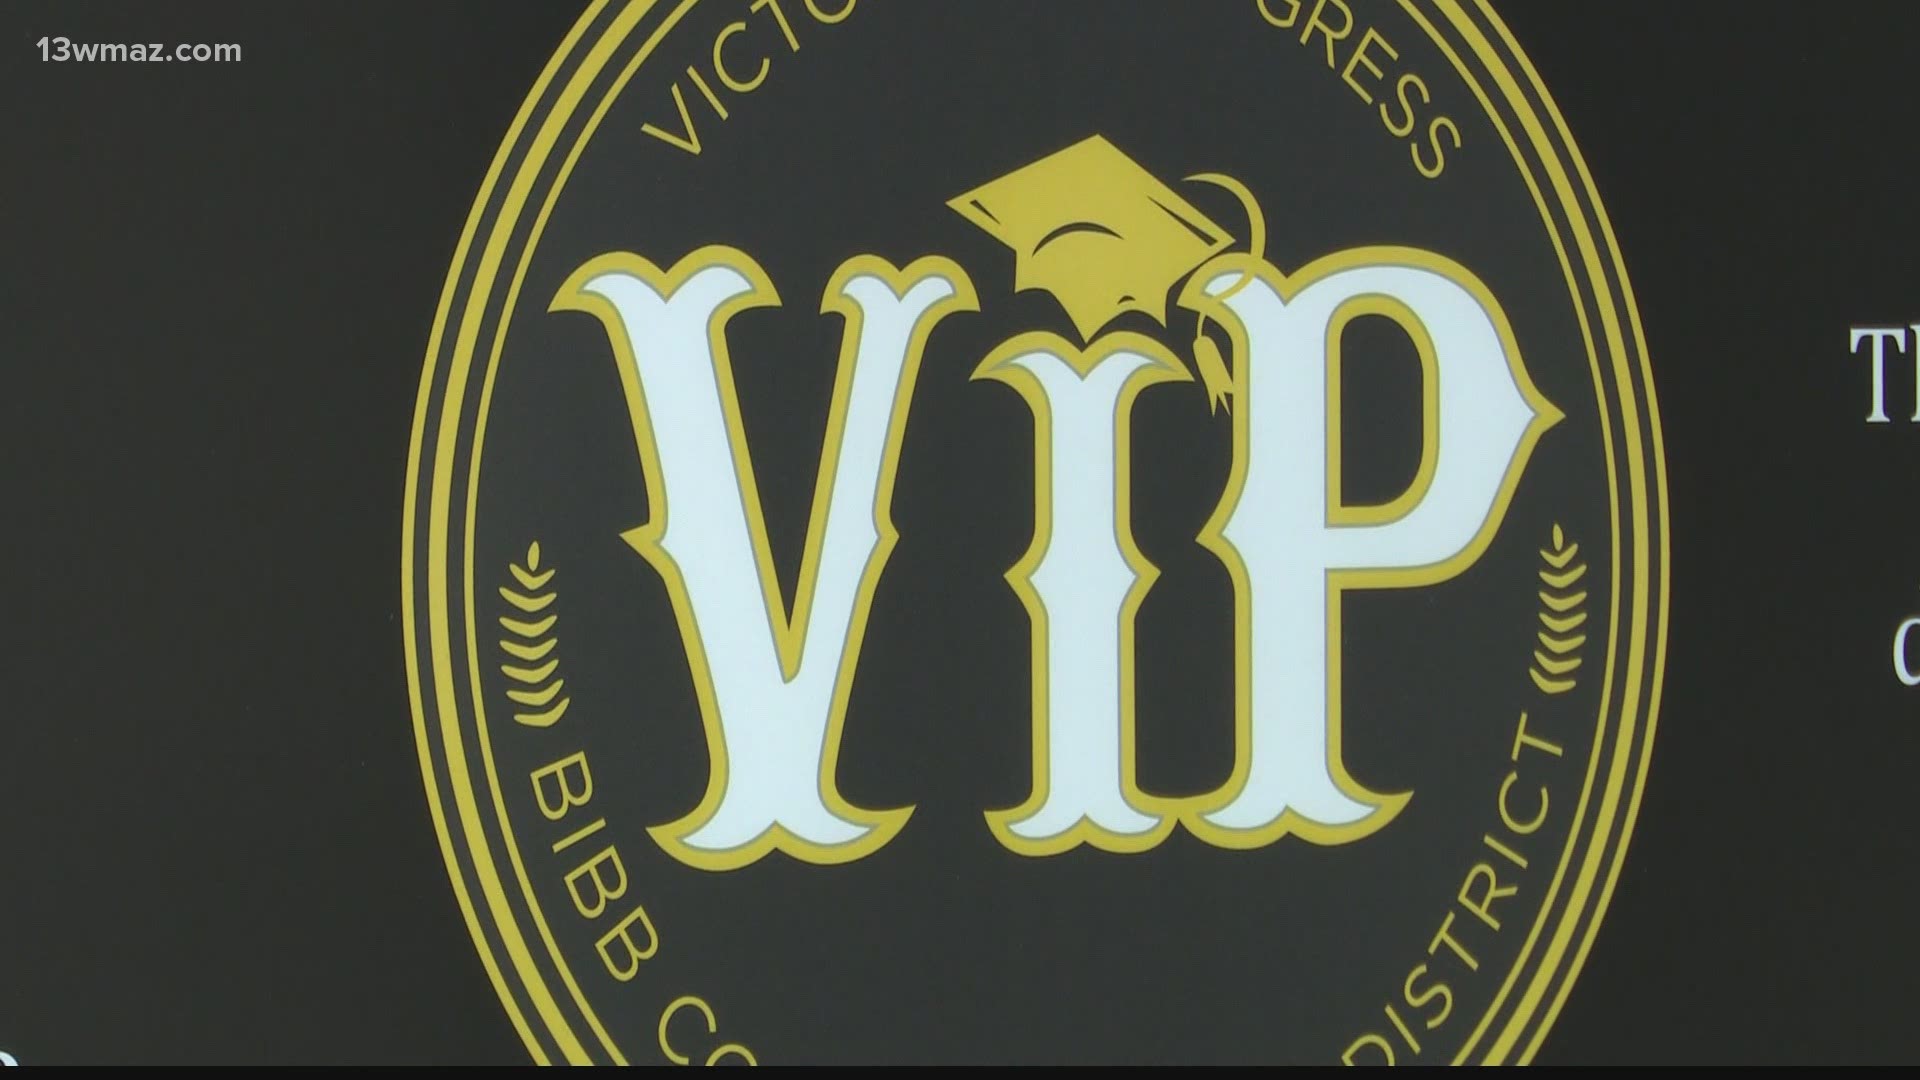 If you're the parent of a Bibb County student who wants to continue virtual learning next year, the school district's VIP program will be available